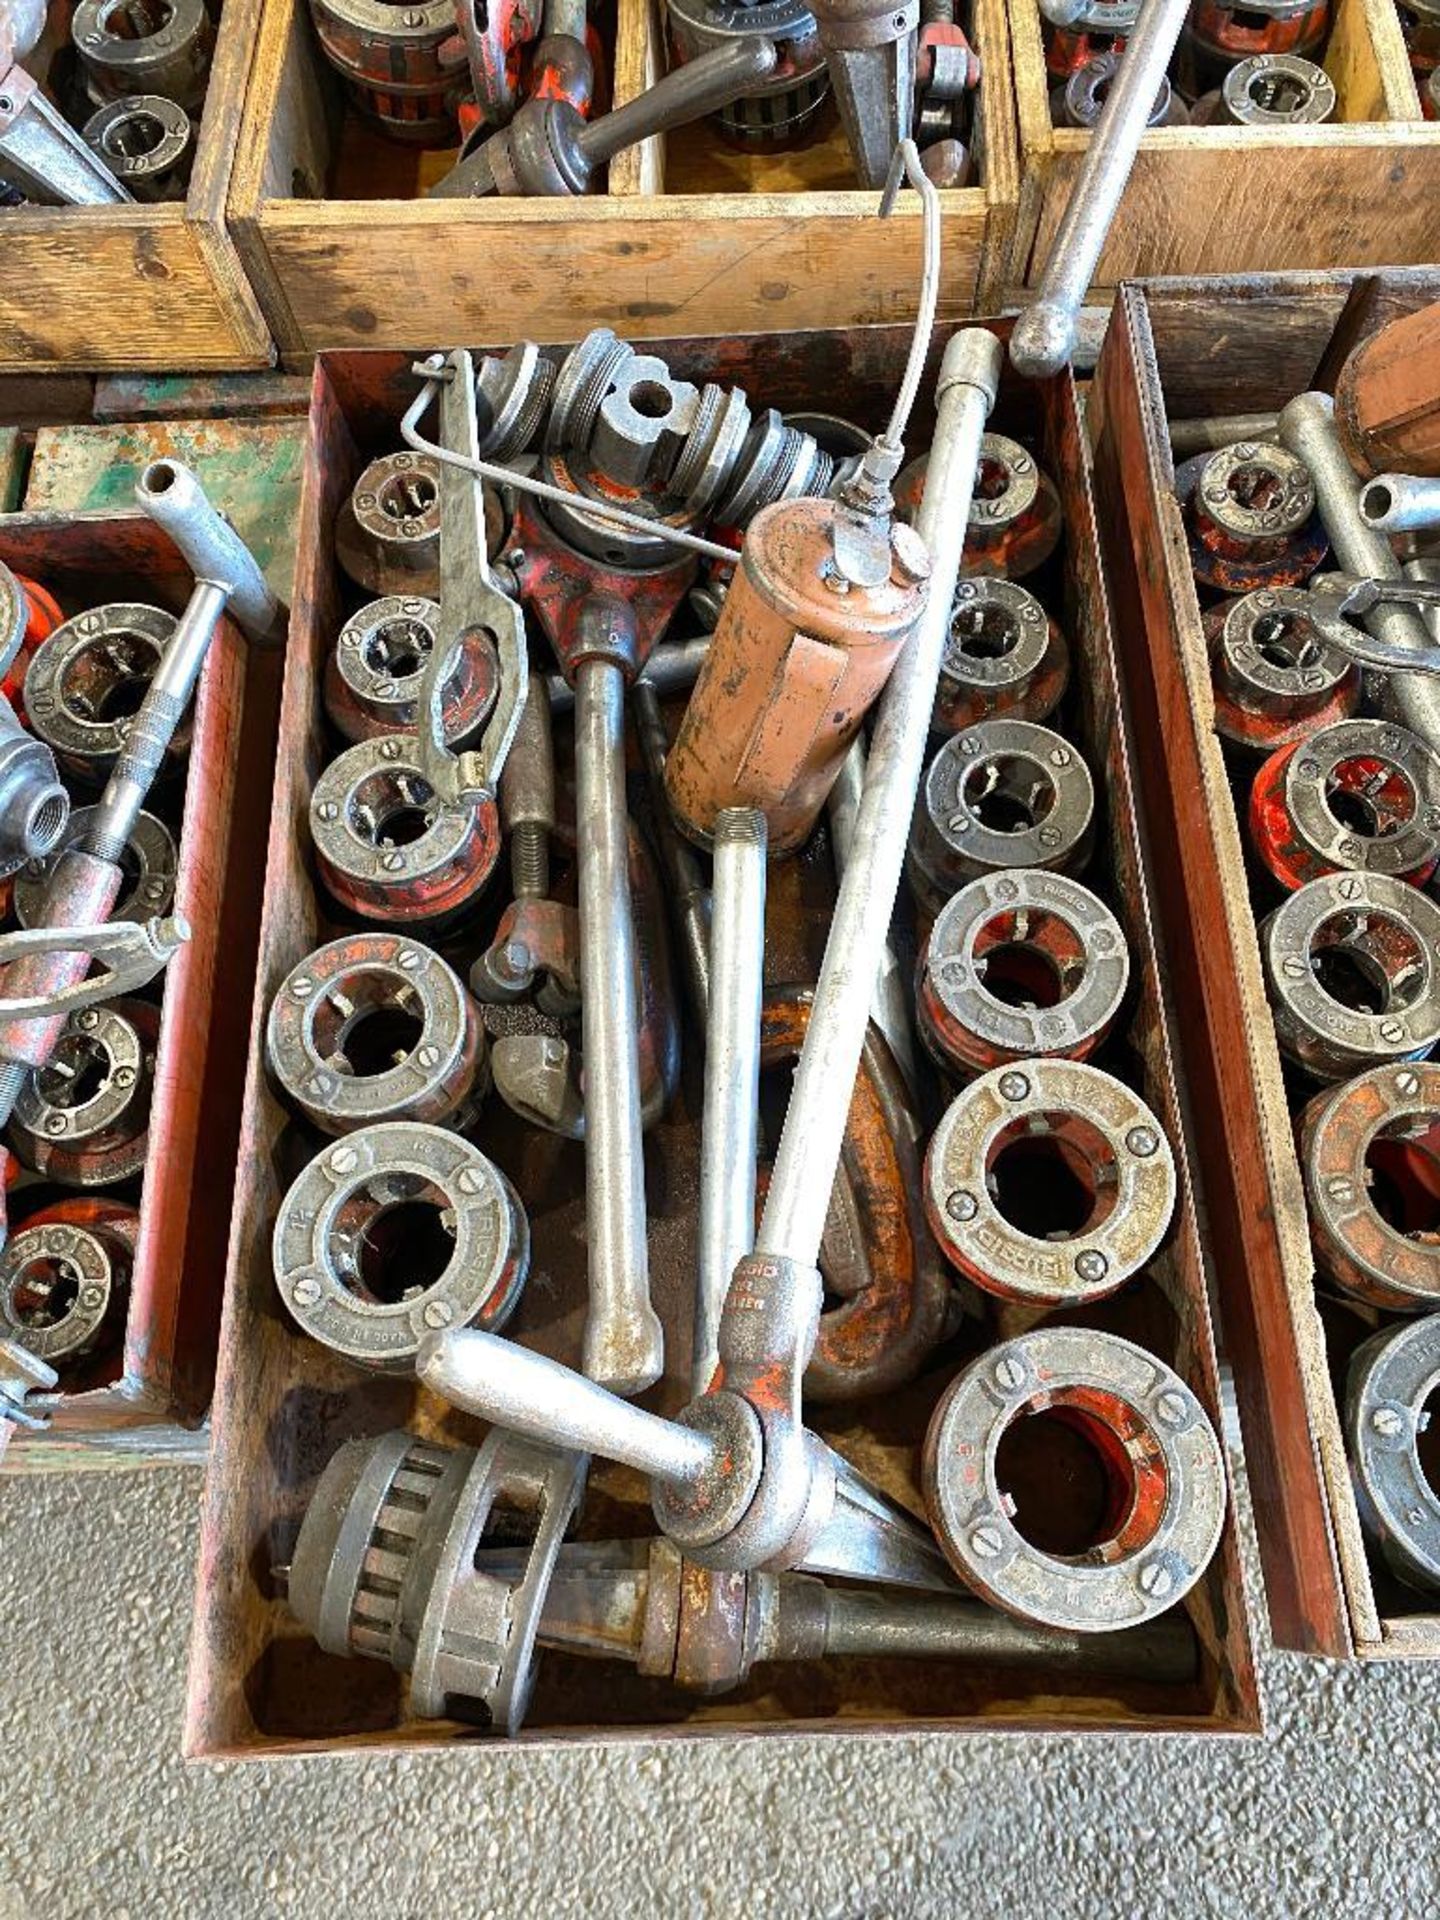 Lot of (2) Asst. Ridgid Manual Threaders Sets including Asst. Die Heads, Pipe Cutters, Reamers, Oil - Image 2 of 3